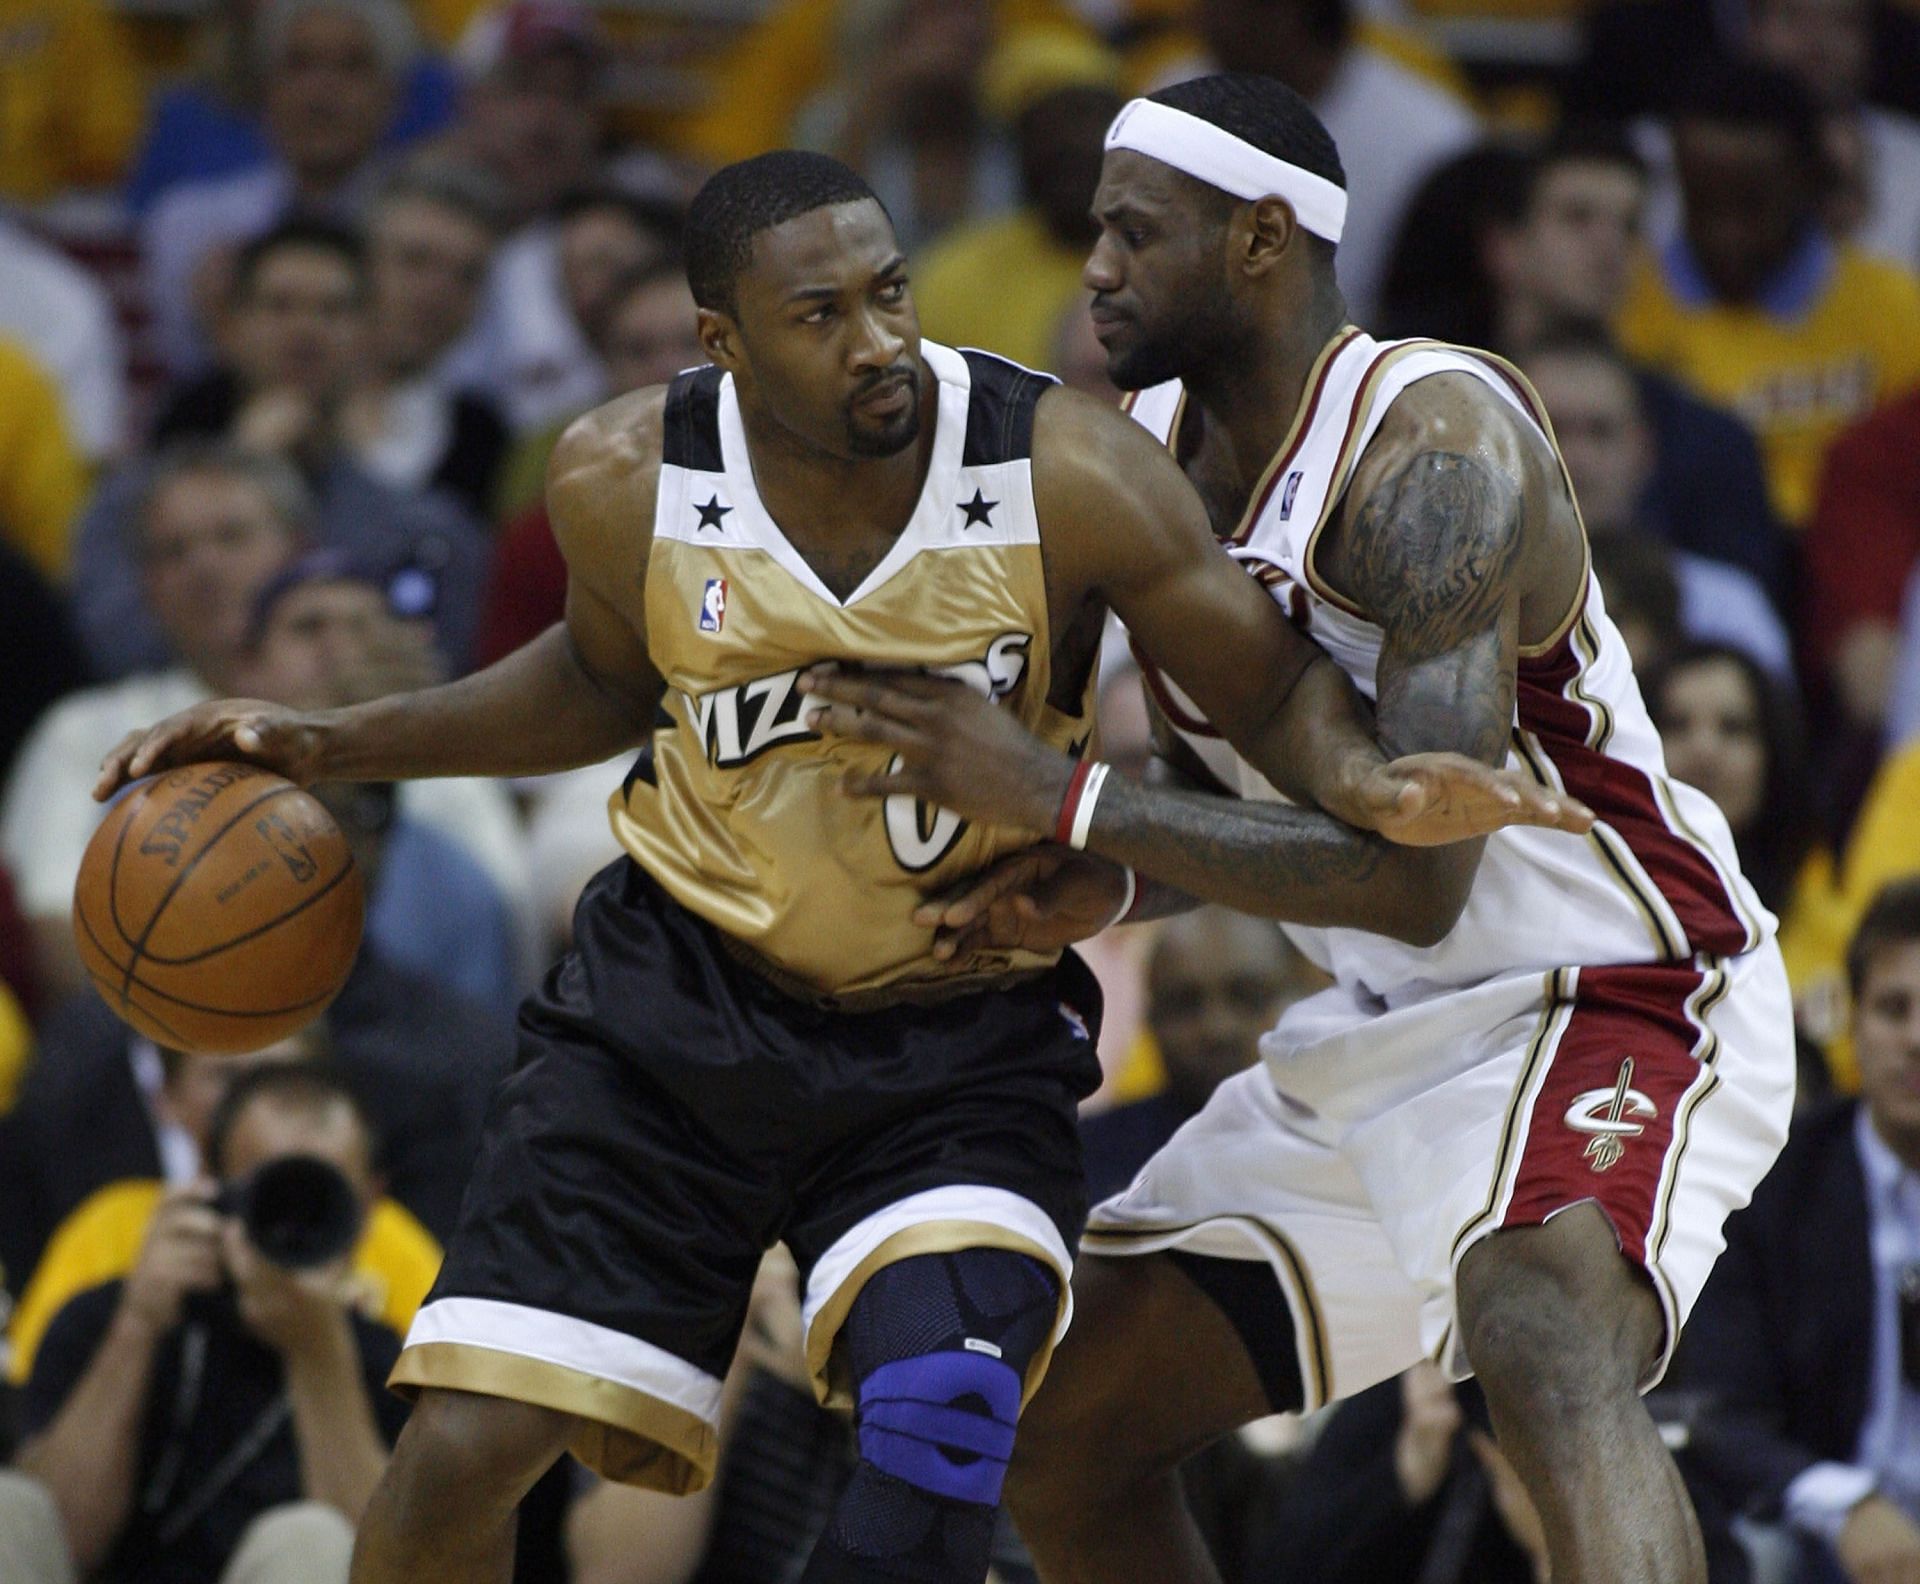 Gilbert Arenas of the Washington Wizards against LeBron James of the Cleveland Cavaliers